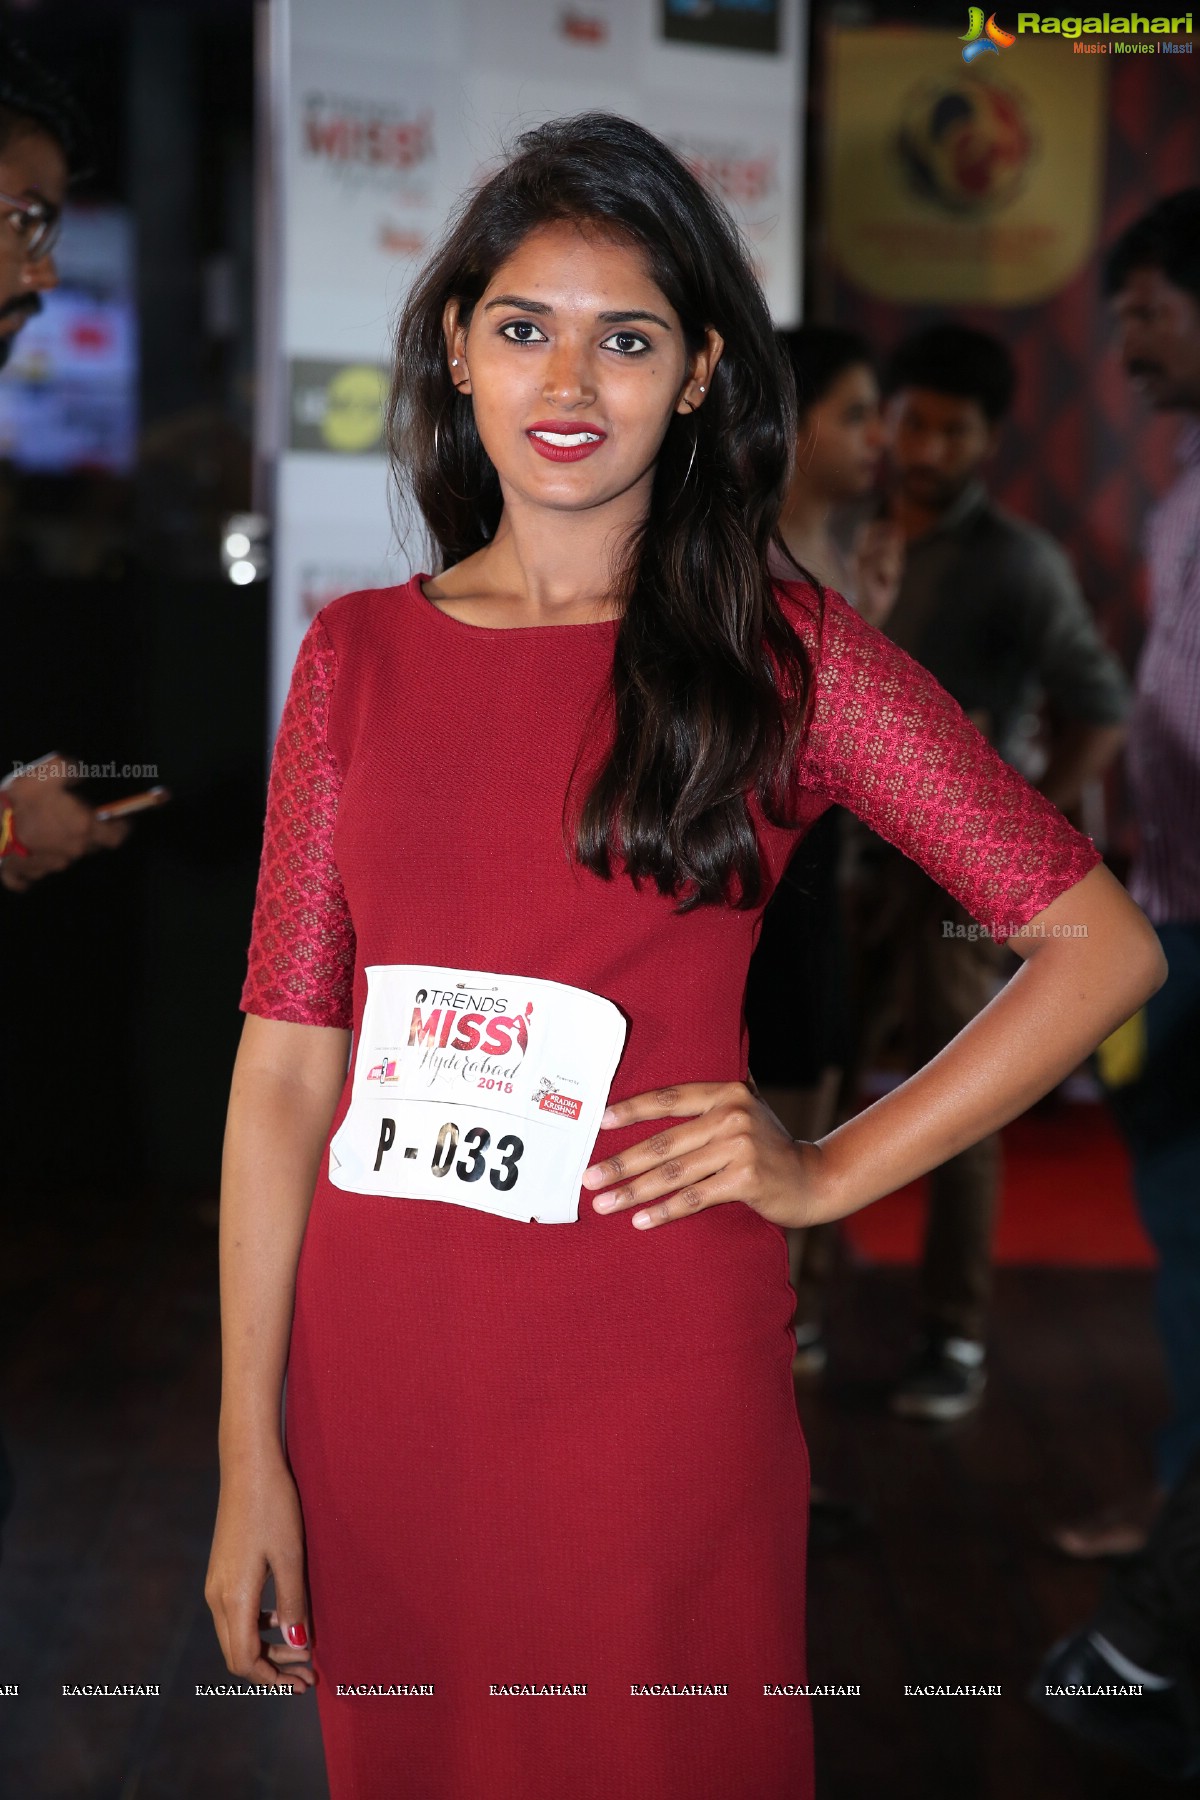 Trends Miss Hyderabad 2018 Auditions at Air Live, Jubilee Hills, Hyderabad